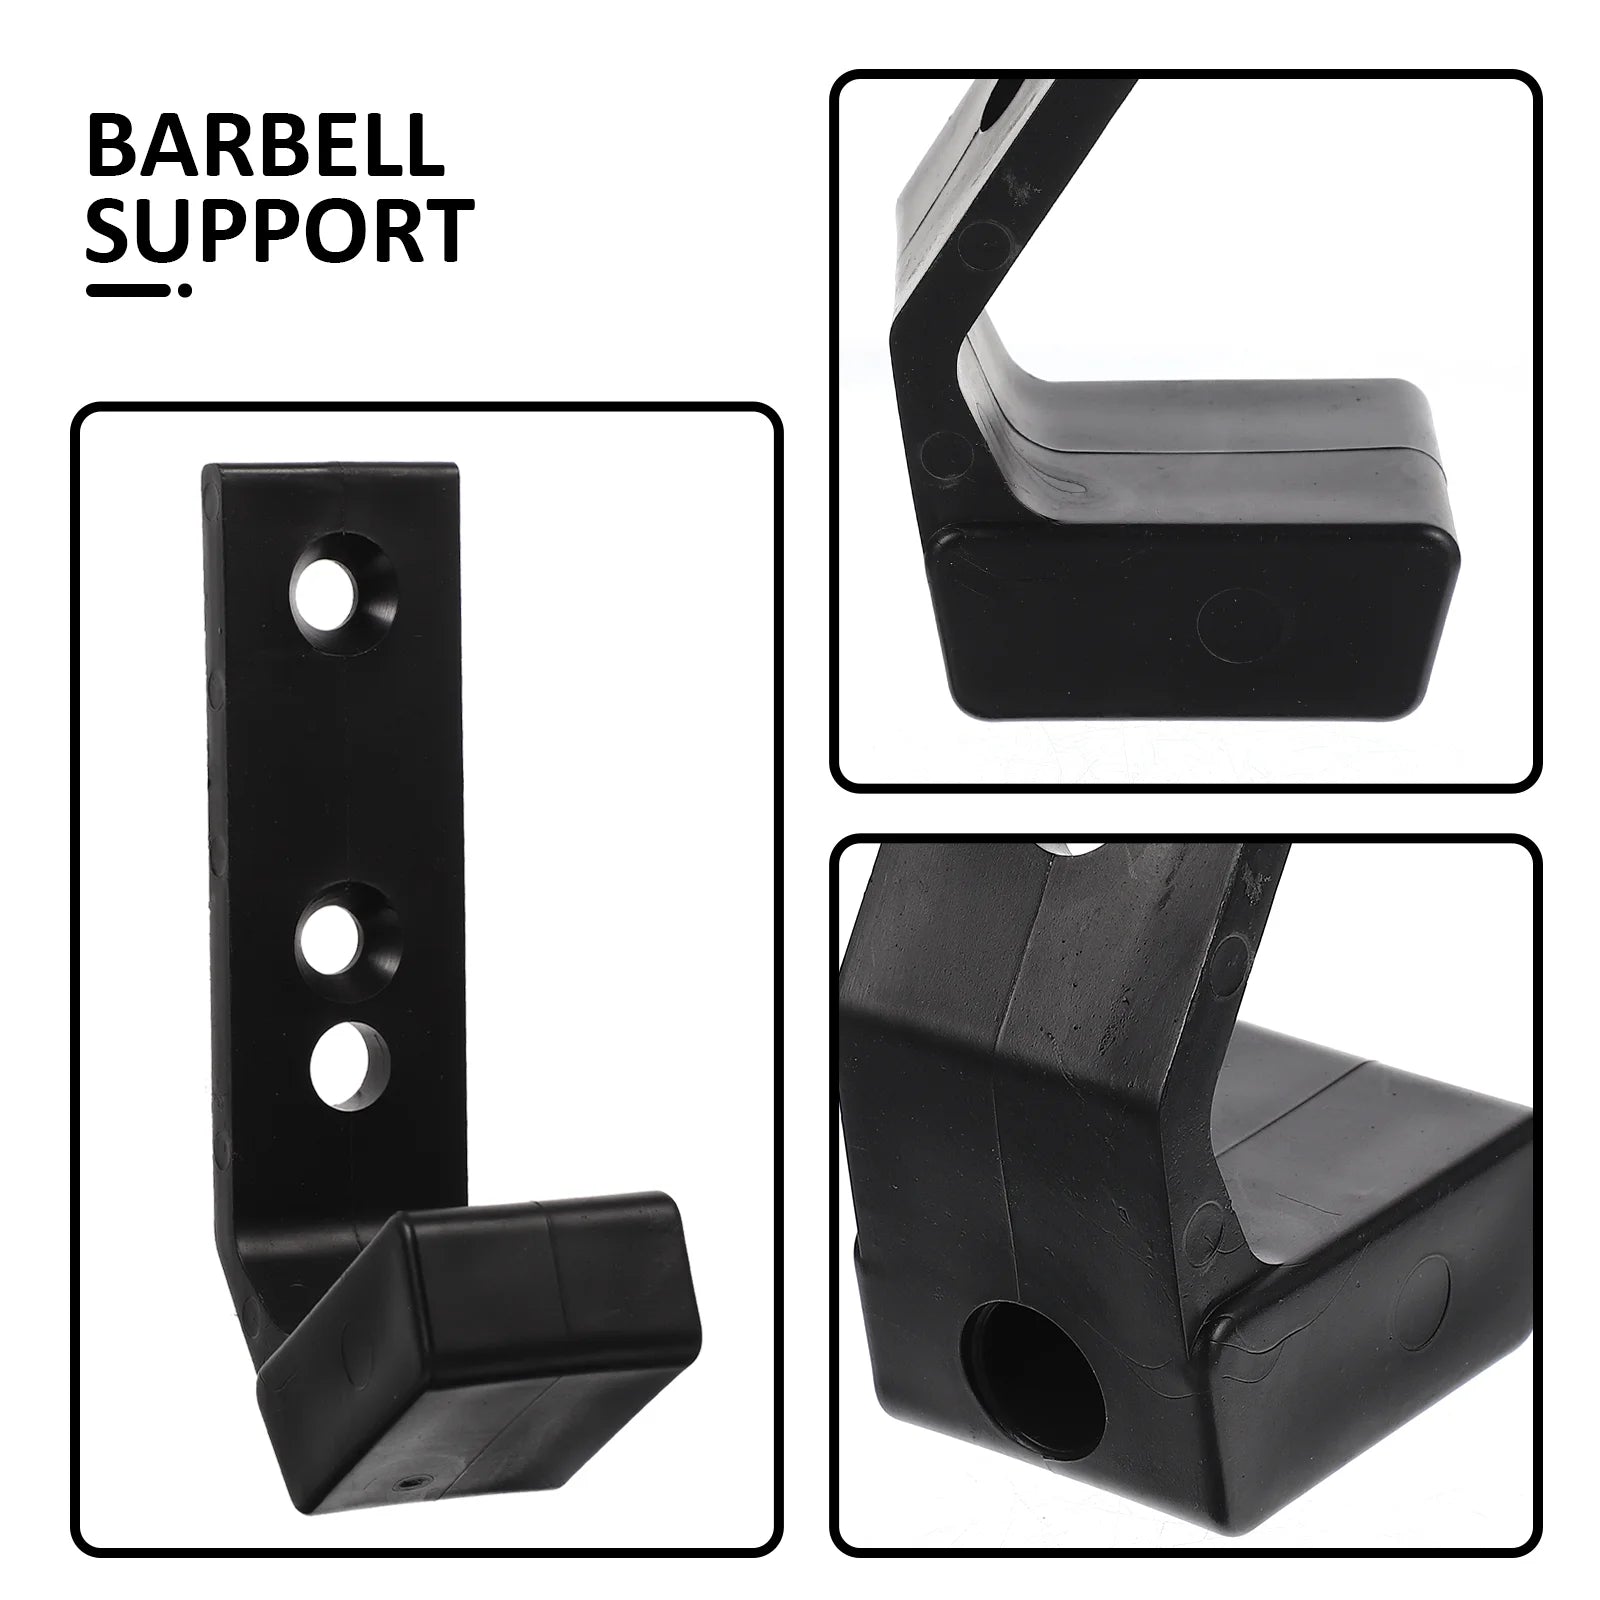 Barbell Rack Holder Storage Weight Dumbbell Wall Fitness Bar Support